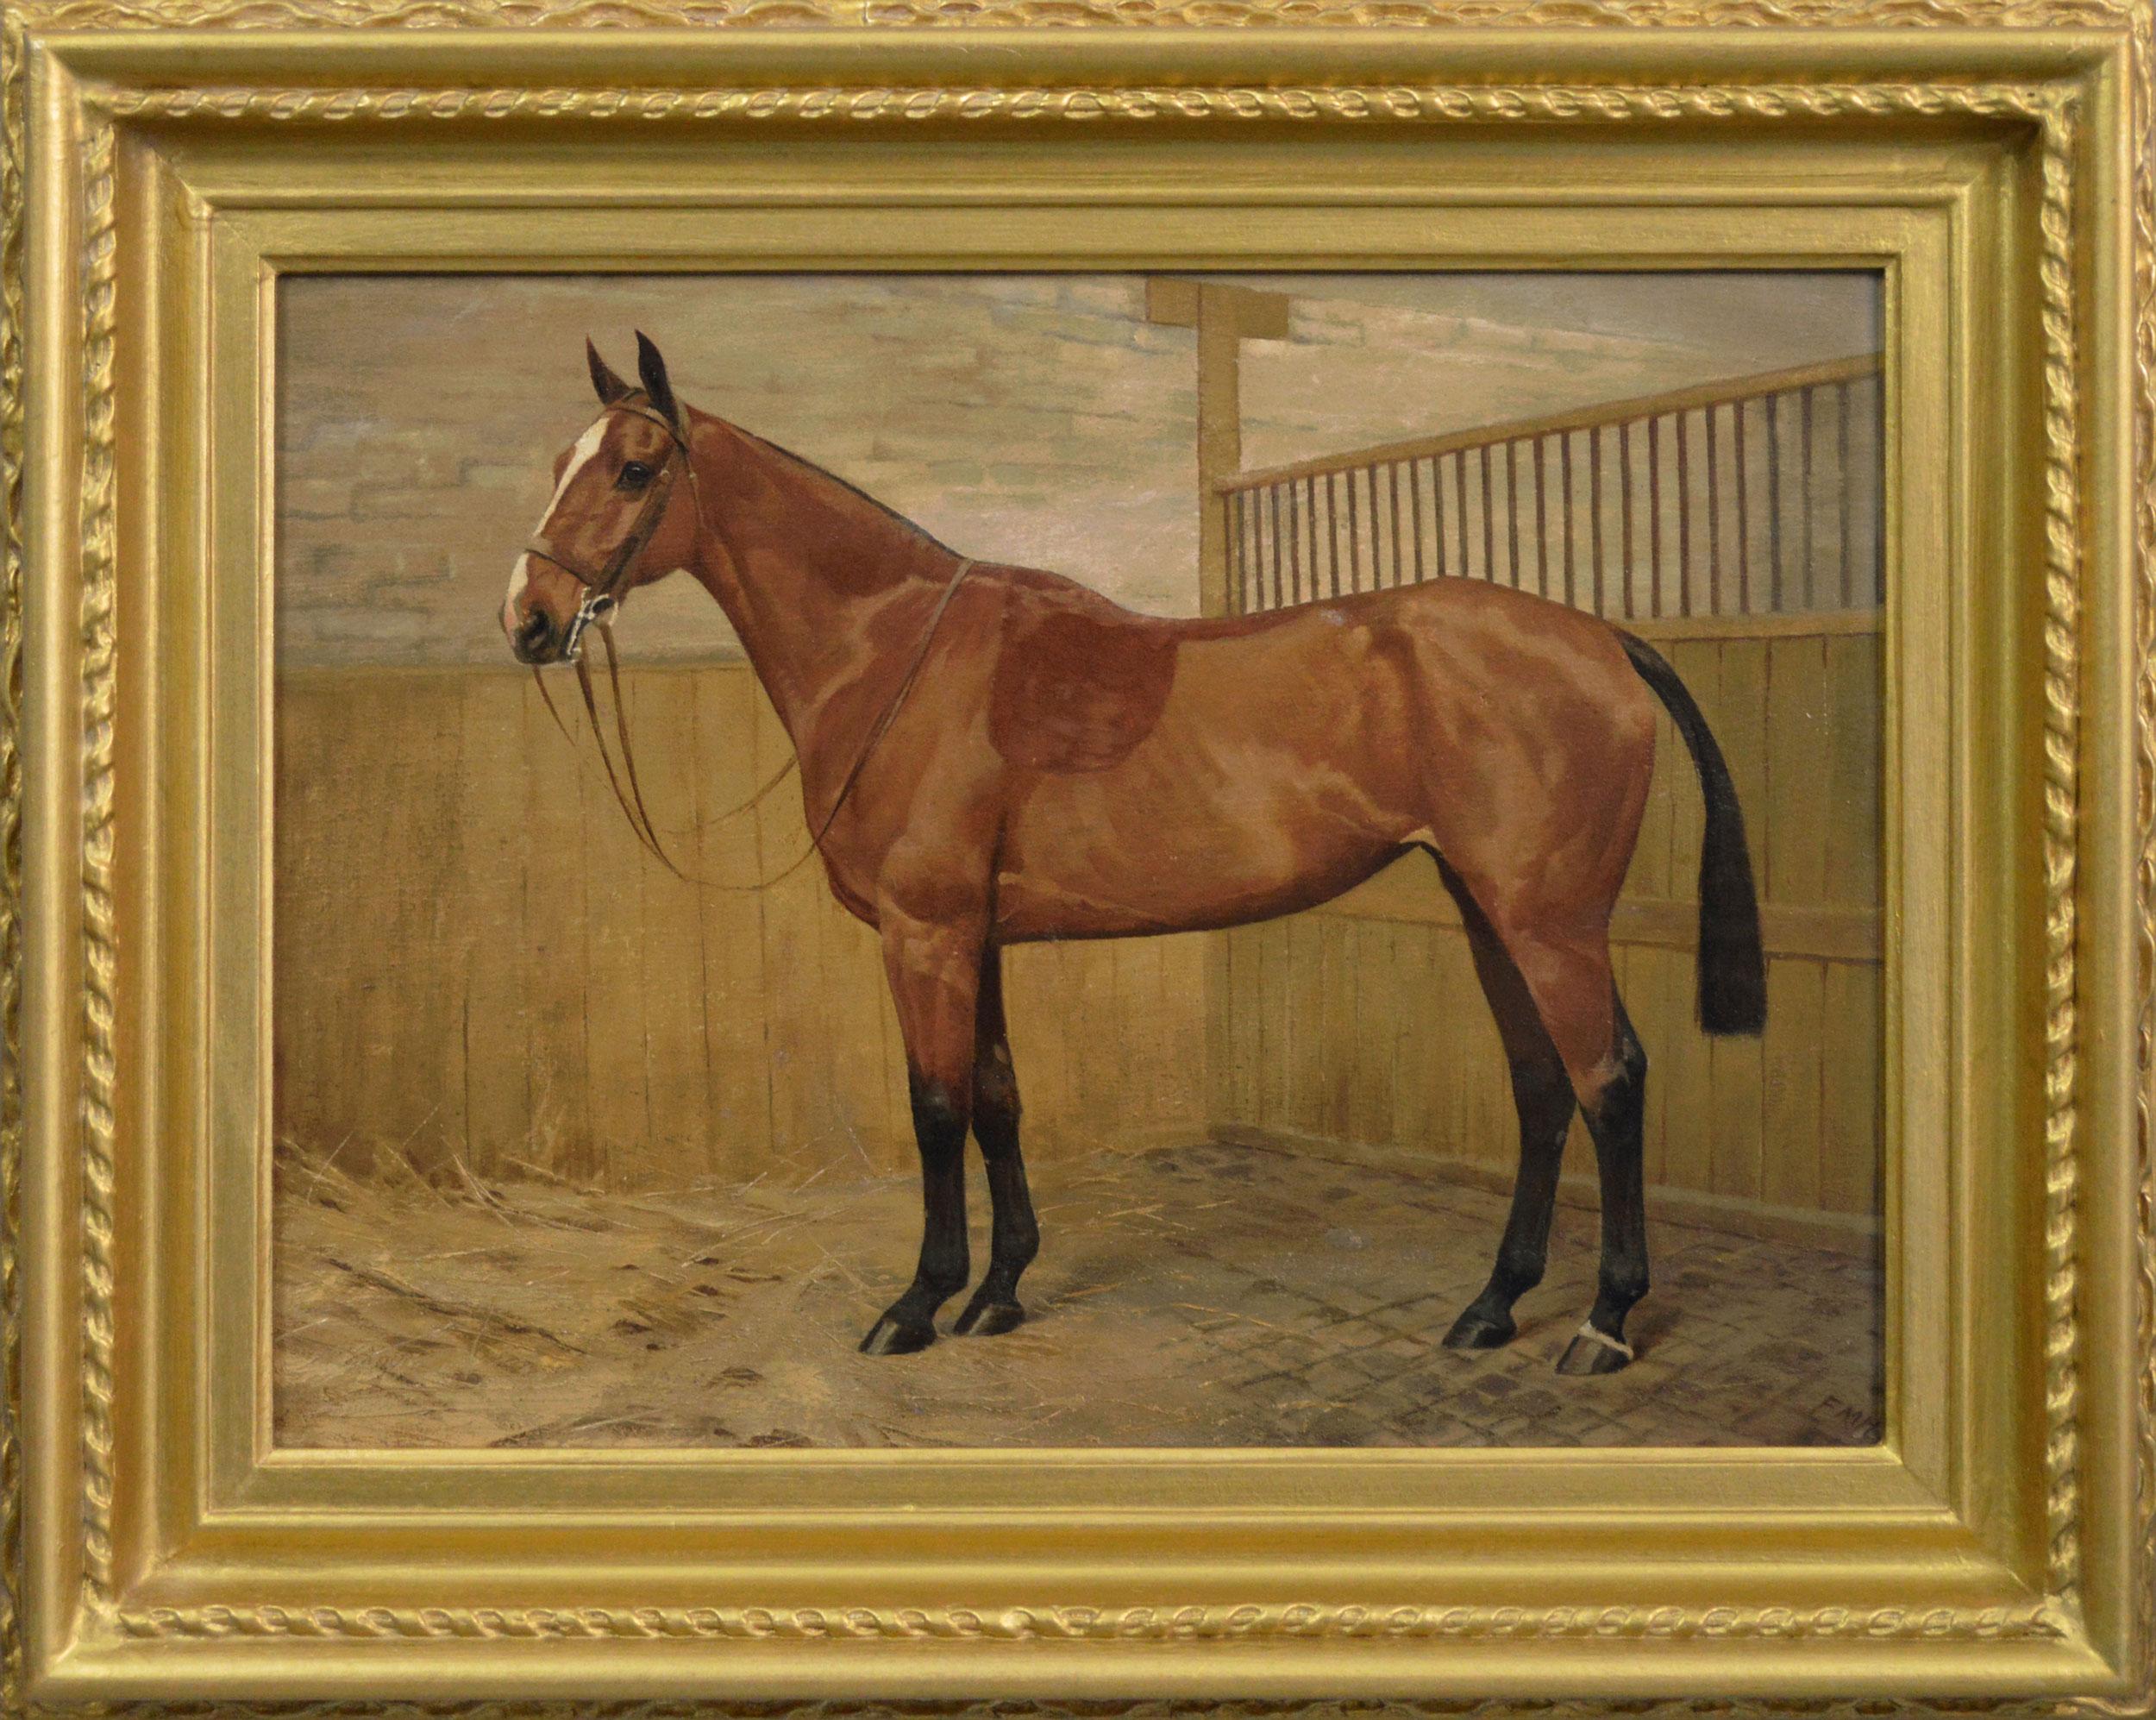 Horse portrait oil painting of a bay hunter in a stable